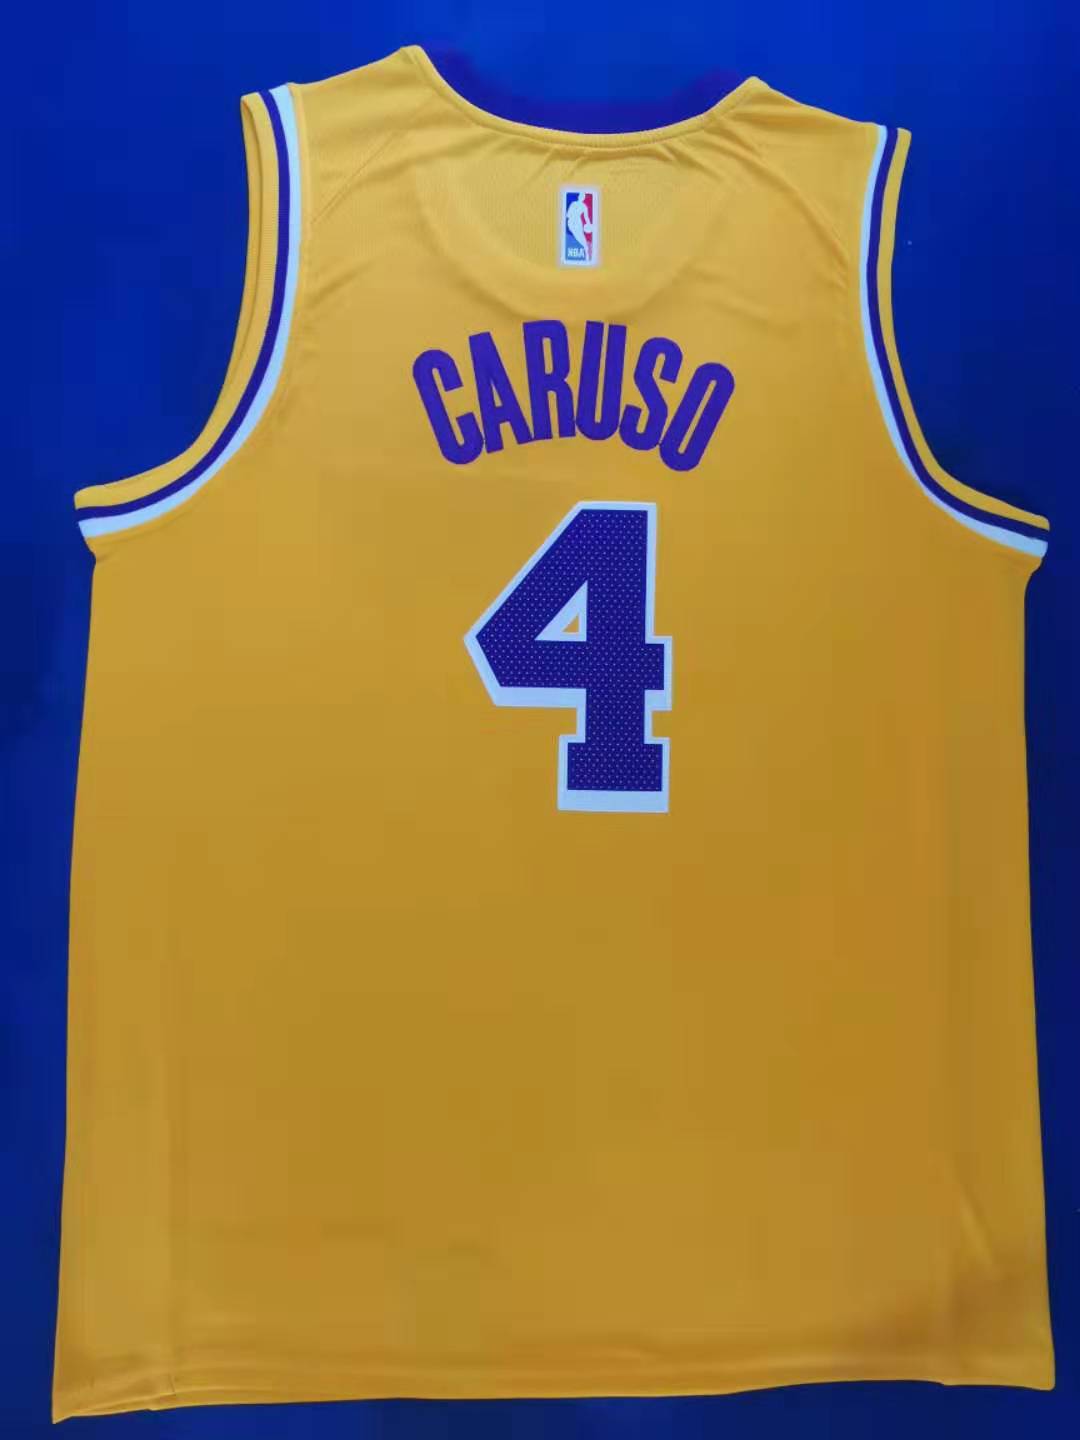 alex caruso jersey number